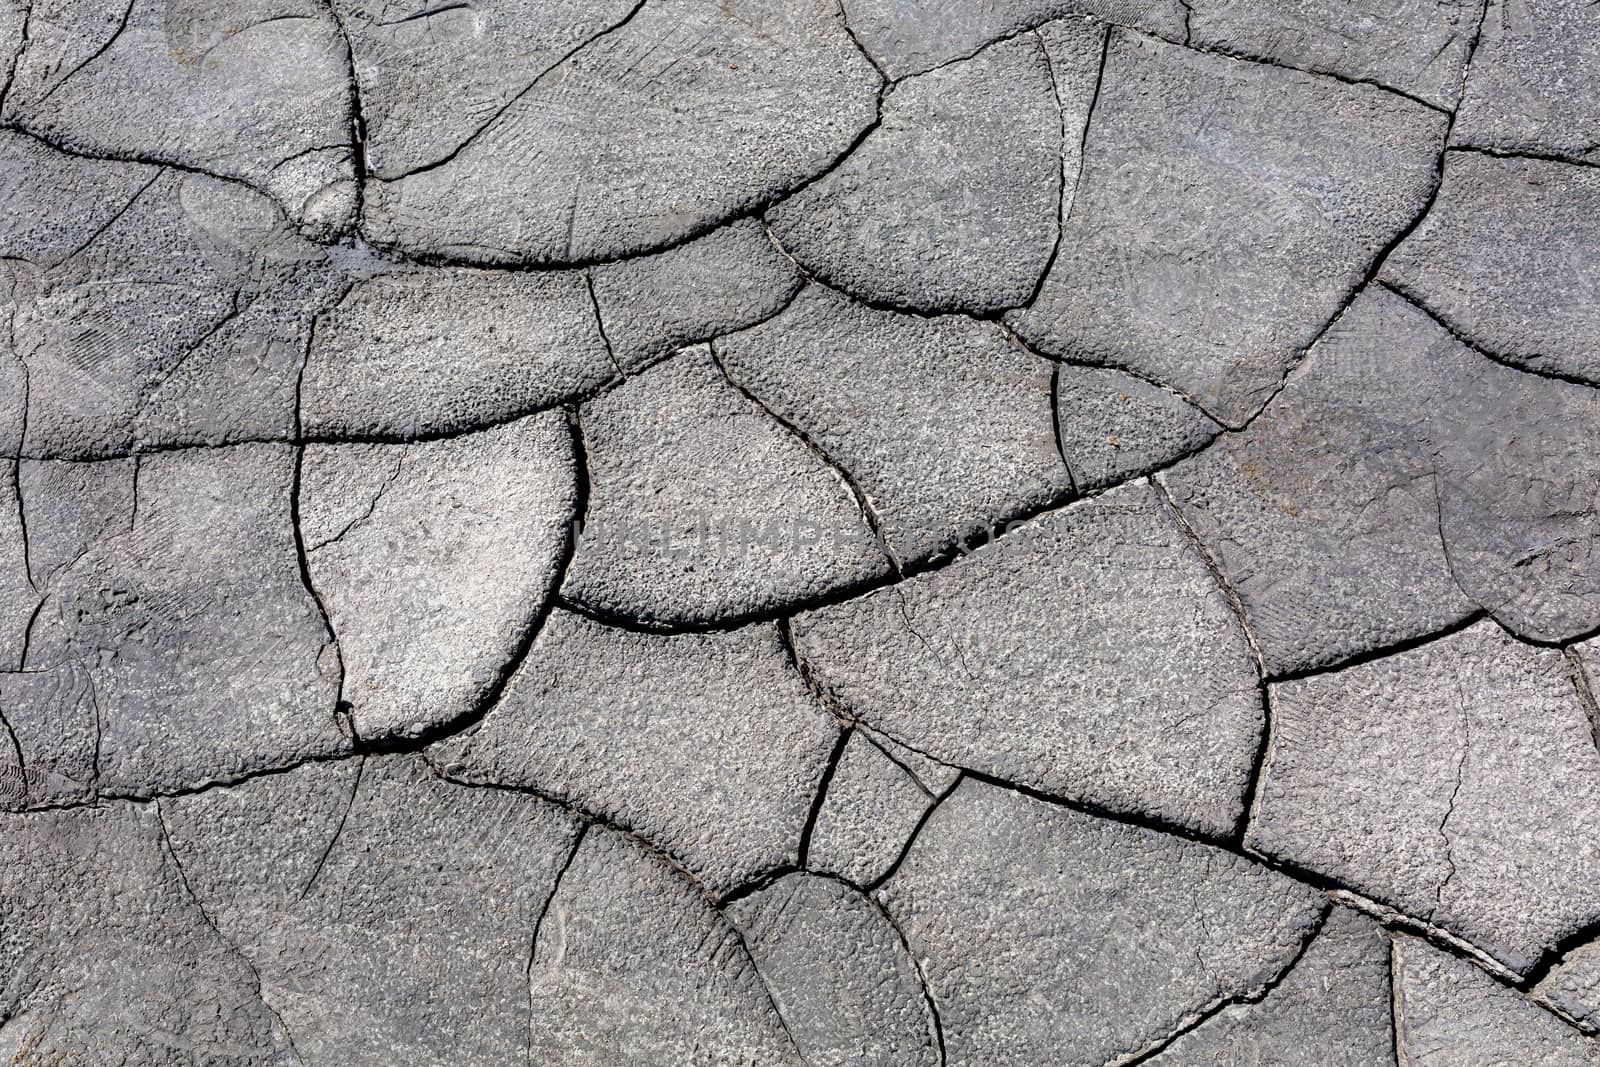 Drought, dried cracked earth. Cracks in clay. Water shortage problem by 977_ReX_977